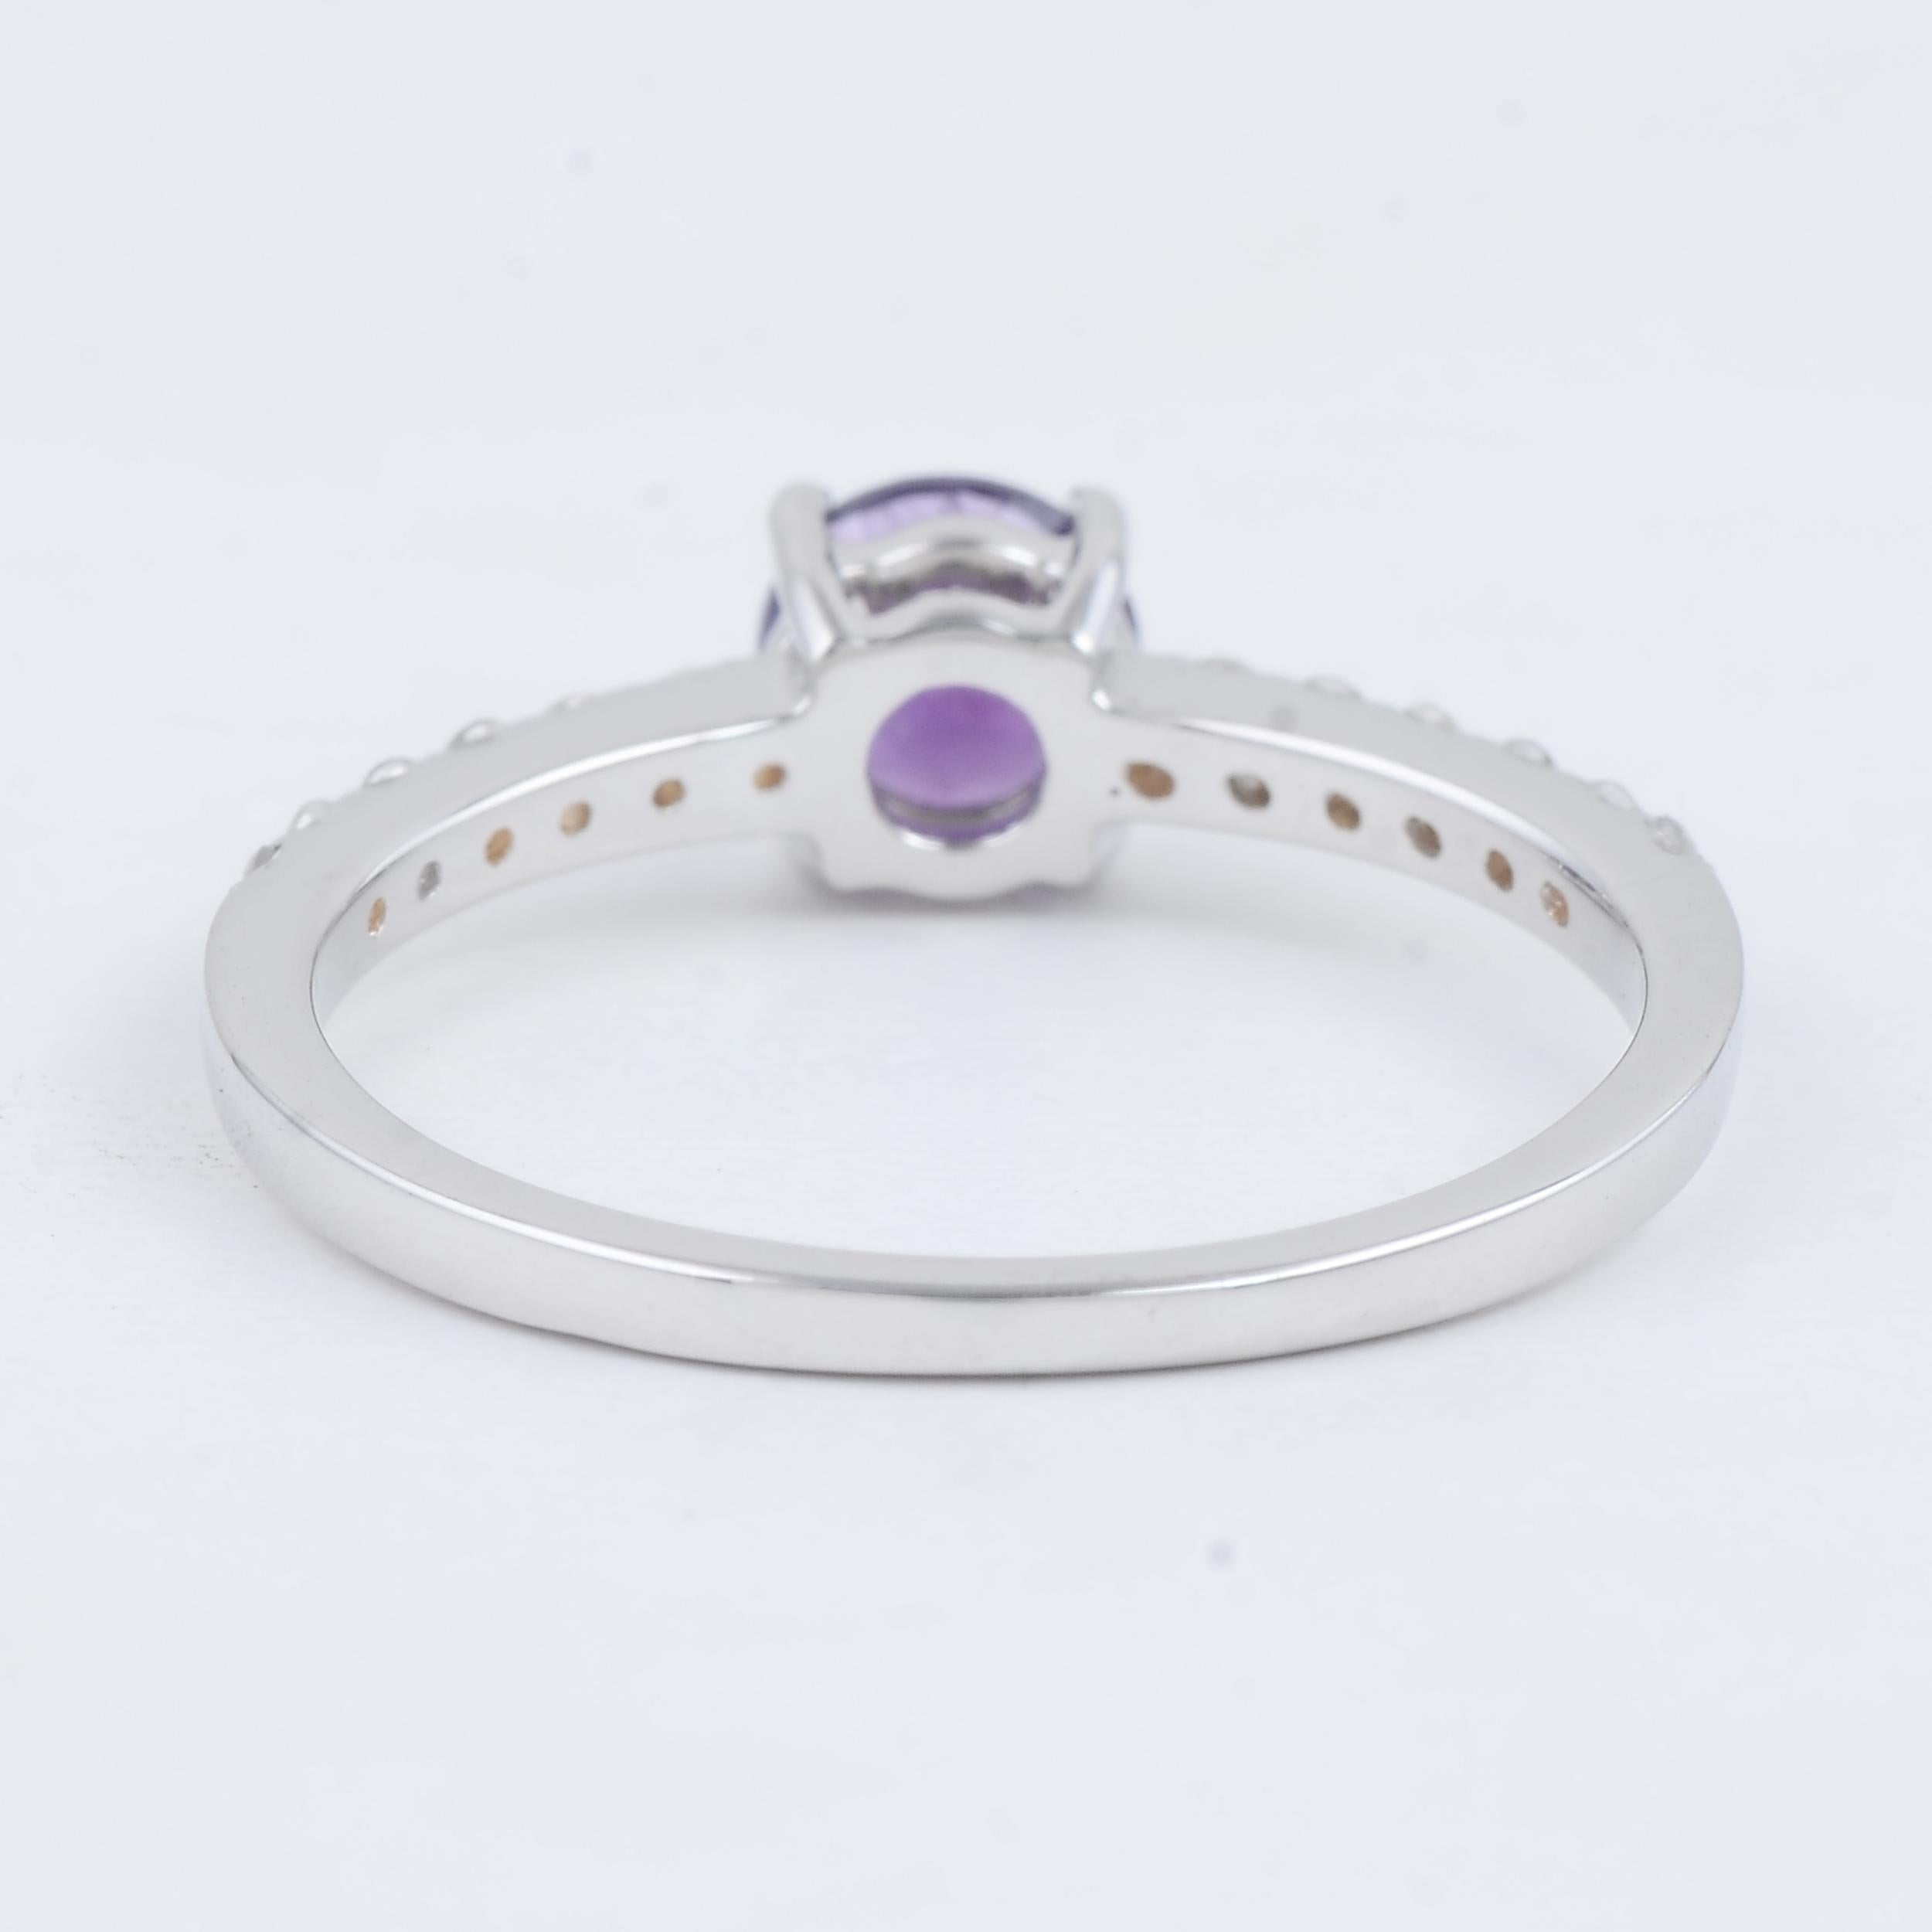 Luxurious 14K Amethyst & Diamond Cocktail Ring, Size 6.75 - Statement Jewelry In New Condition For Sale In Holtsville, NY